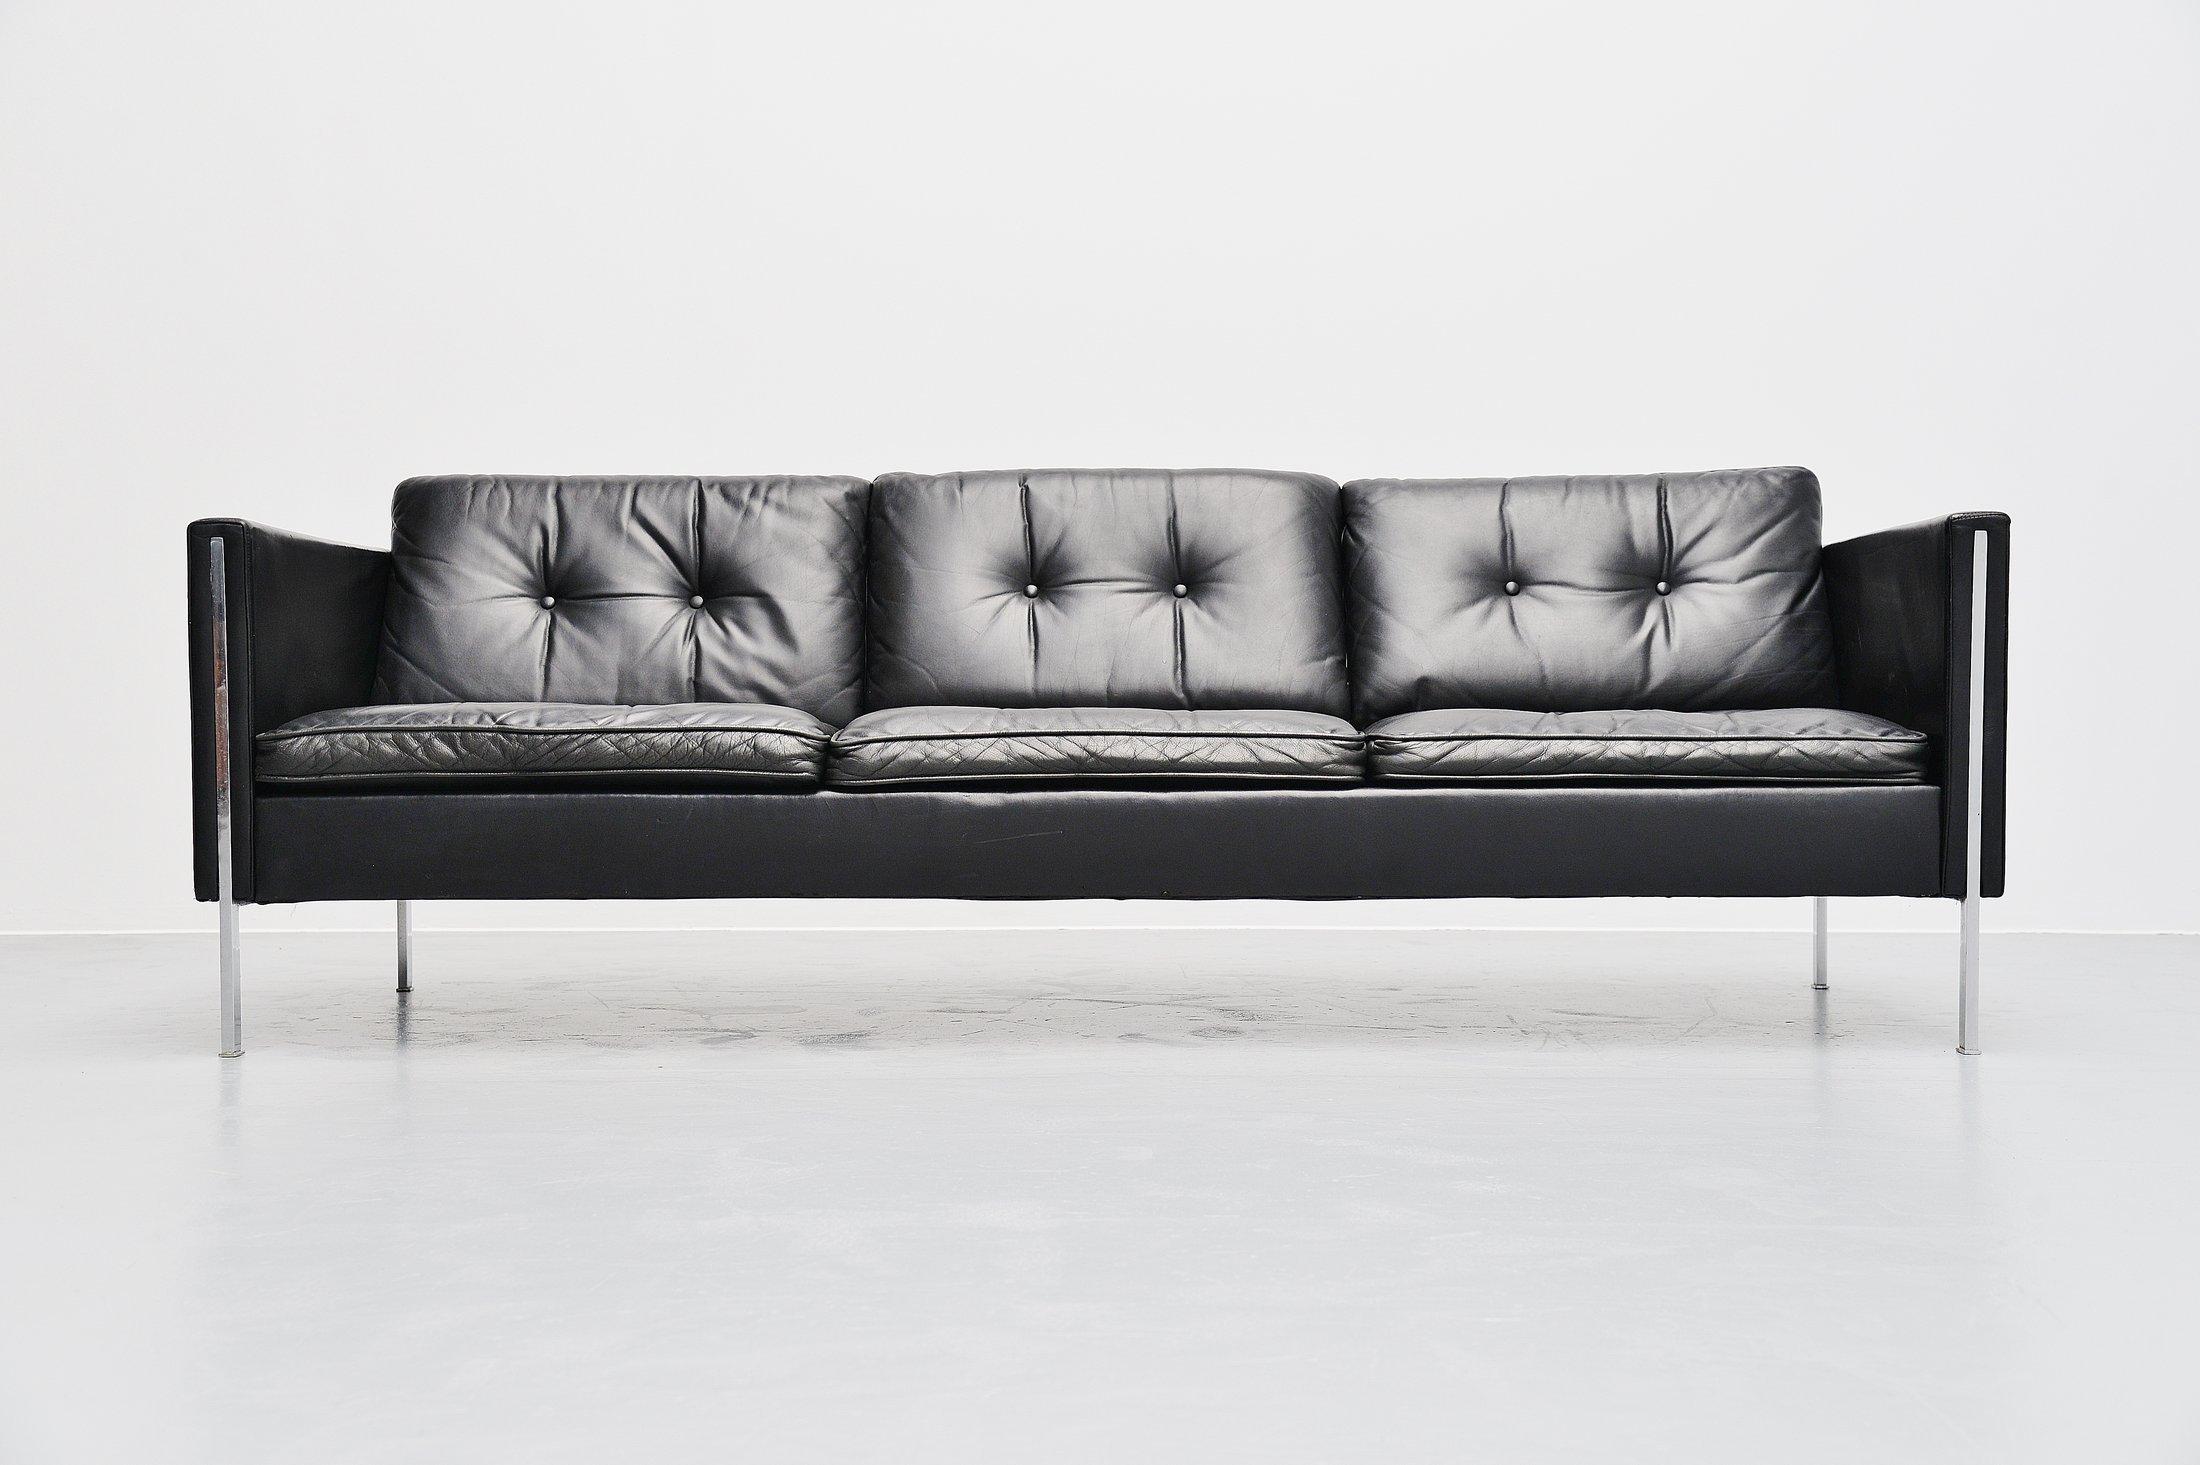 Nice and rare early sofa designed by Pierre Paulin and manufactured by Artifort, Holland 1962. This is for model 442/3 which is the largest from these series, a 3 seater sofa in quality black leather and matte chrome-plated steel legs. Very nice and